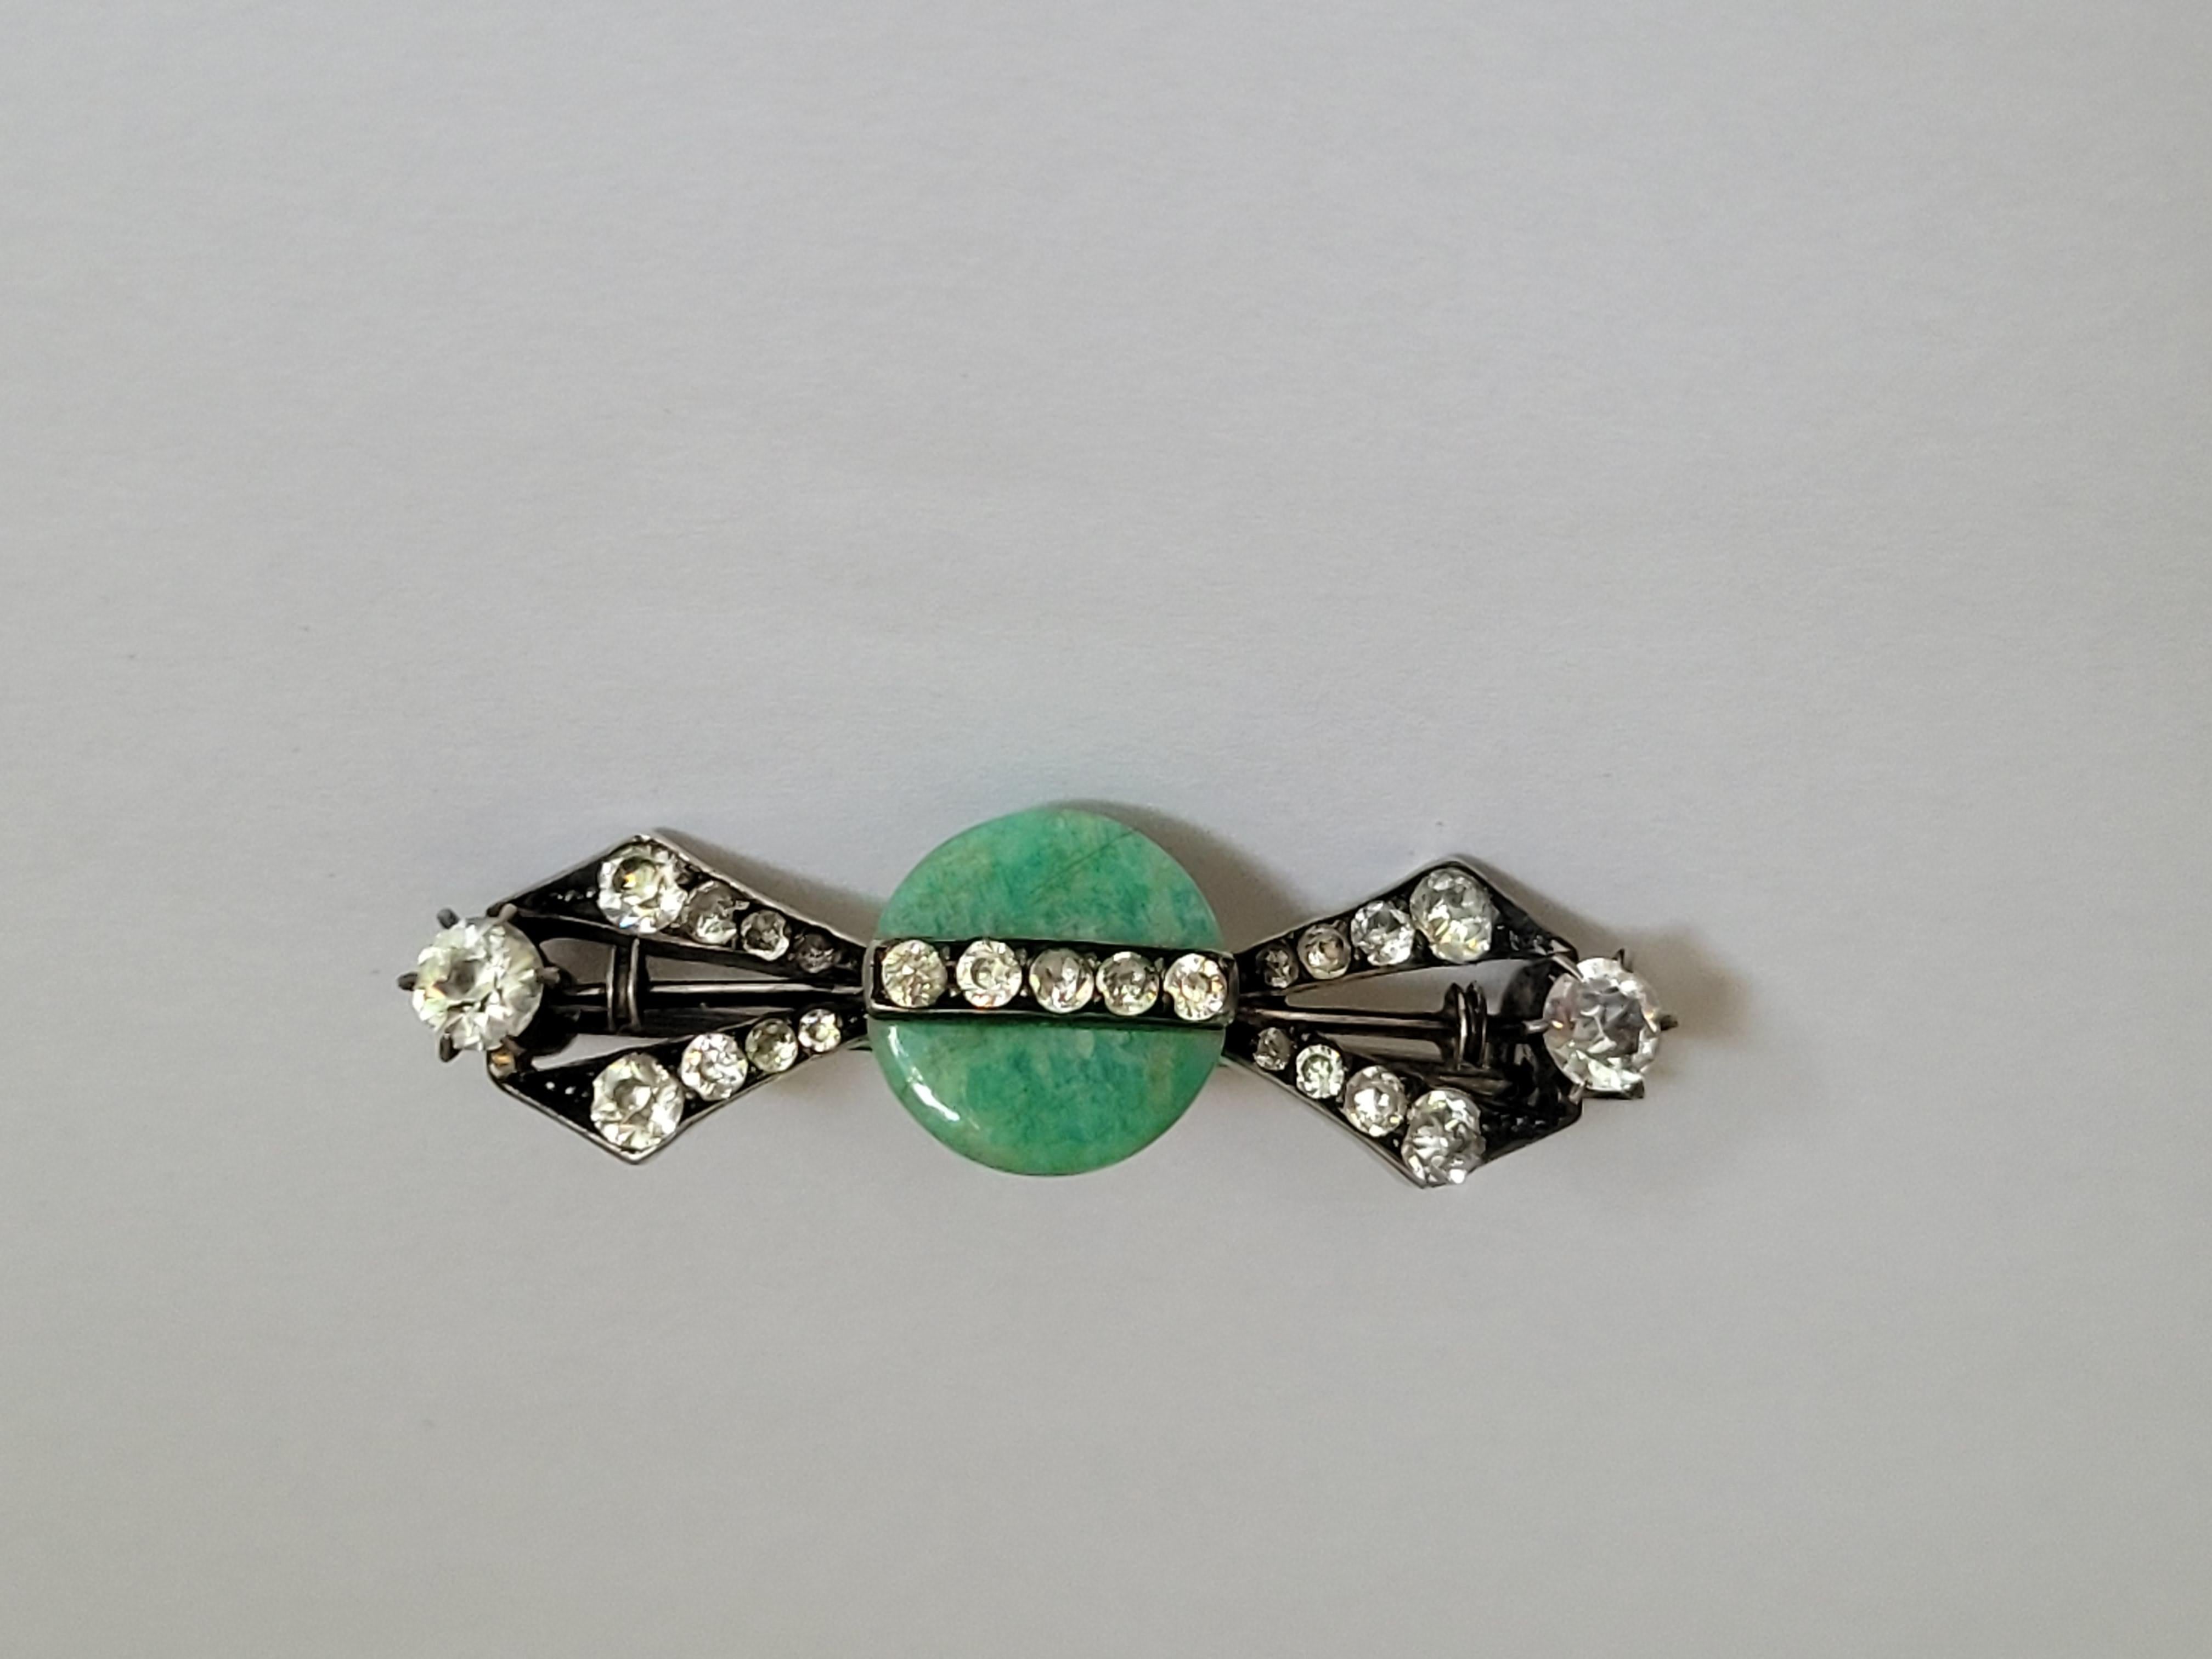 A Beautiful Art Deco c.1920s/30s Sterling Silver, Pecking glass and Paste brooch. Rare to find! 
Length 42mm, height 12mm.
Marked: Sterl.S. for Sterling Silver and F.W.H. maker mark. 
The brooch in good condition and ready to wear.
